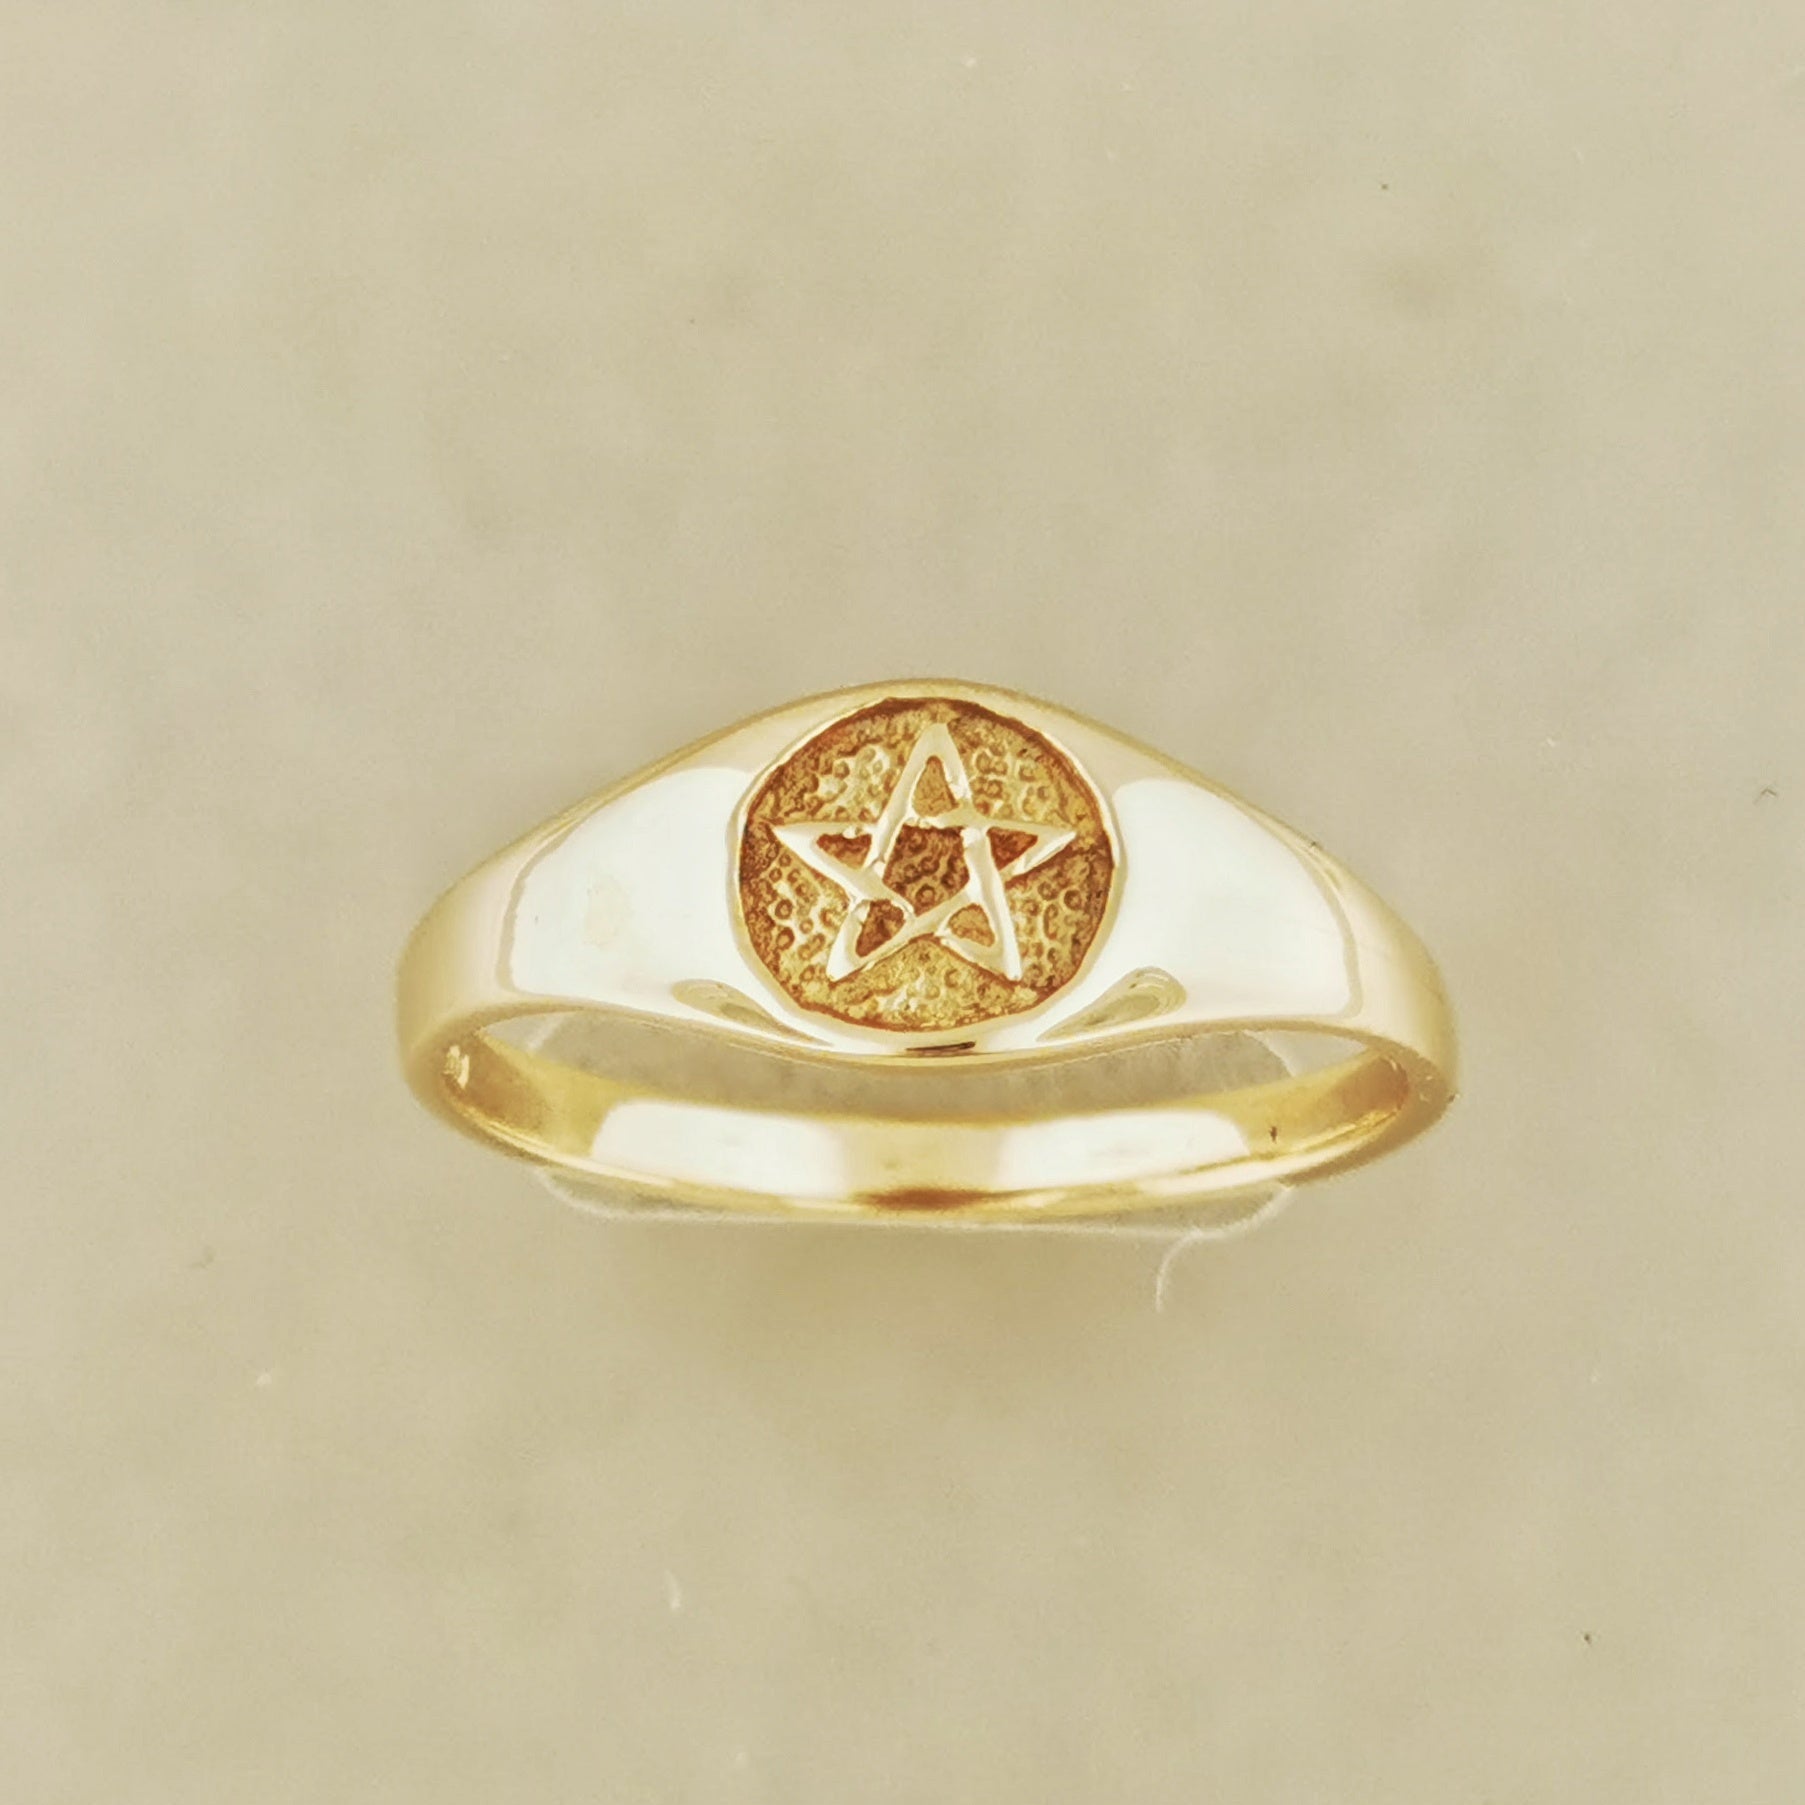 Ladies Pentacle Ring in Sterling Silver or Antique Bronze,  Silver Pentacle Ring, Bronze Pentacle Ring, Ladies Pentacle Ring, Silver Pagan Ring, Antique Bronze Pagan Ring, Silver Pagan Jewelry, Bronze Pagan Jewelry, Silver Wicca Ring, Bronze Wicca Ring, Silver Witch Ring, Bronze Witch Ring, Silver Star Ring, Bronze Star Ring